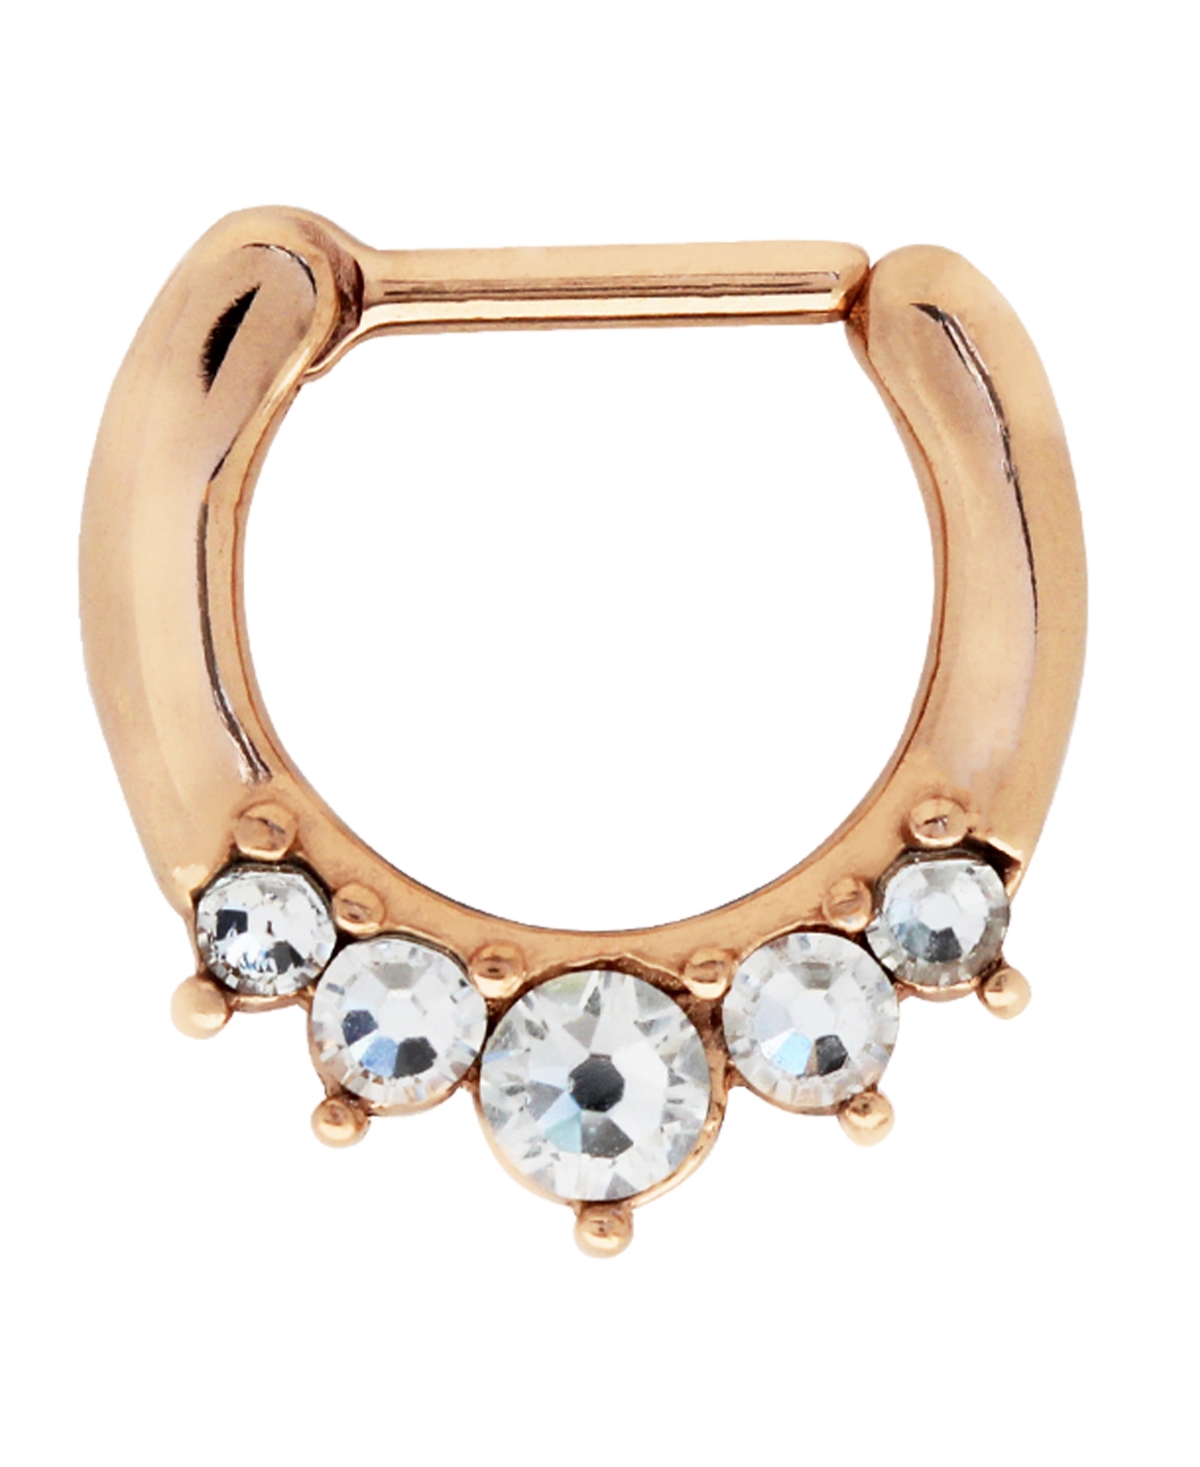 Bodifine Stainless Steel Crystal Septum Clicker - Rose Gold